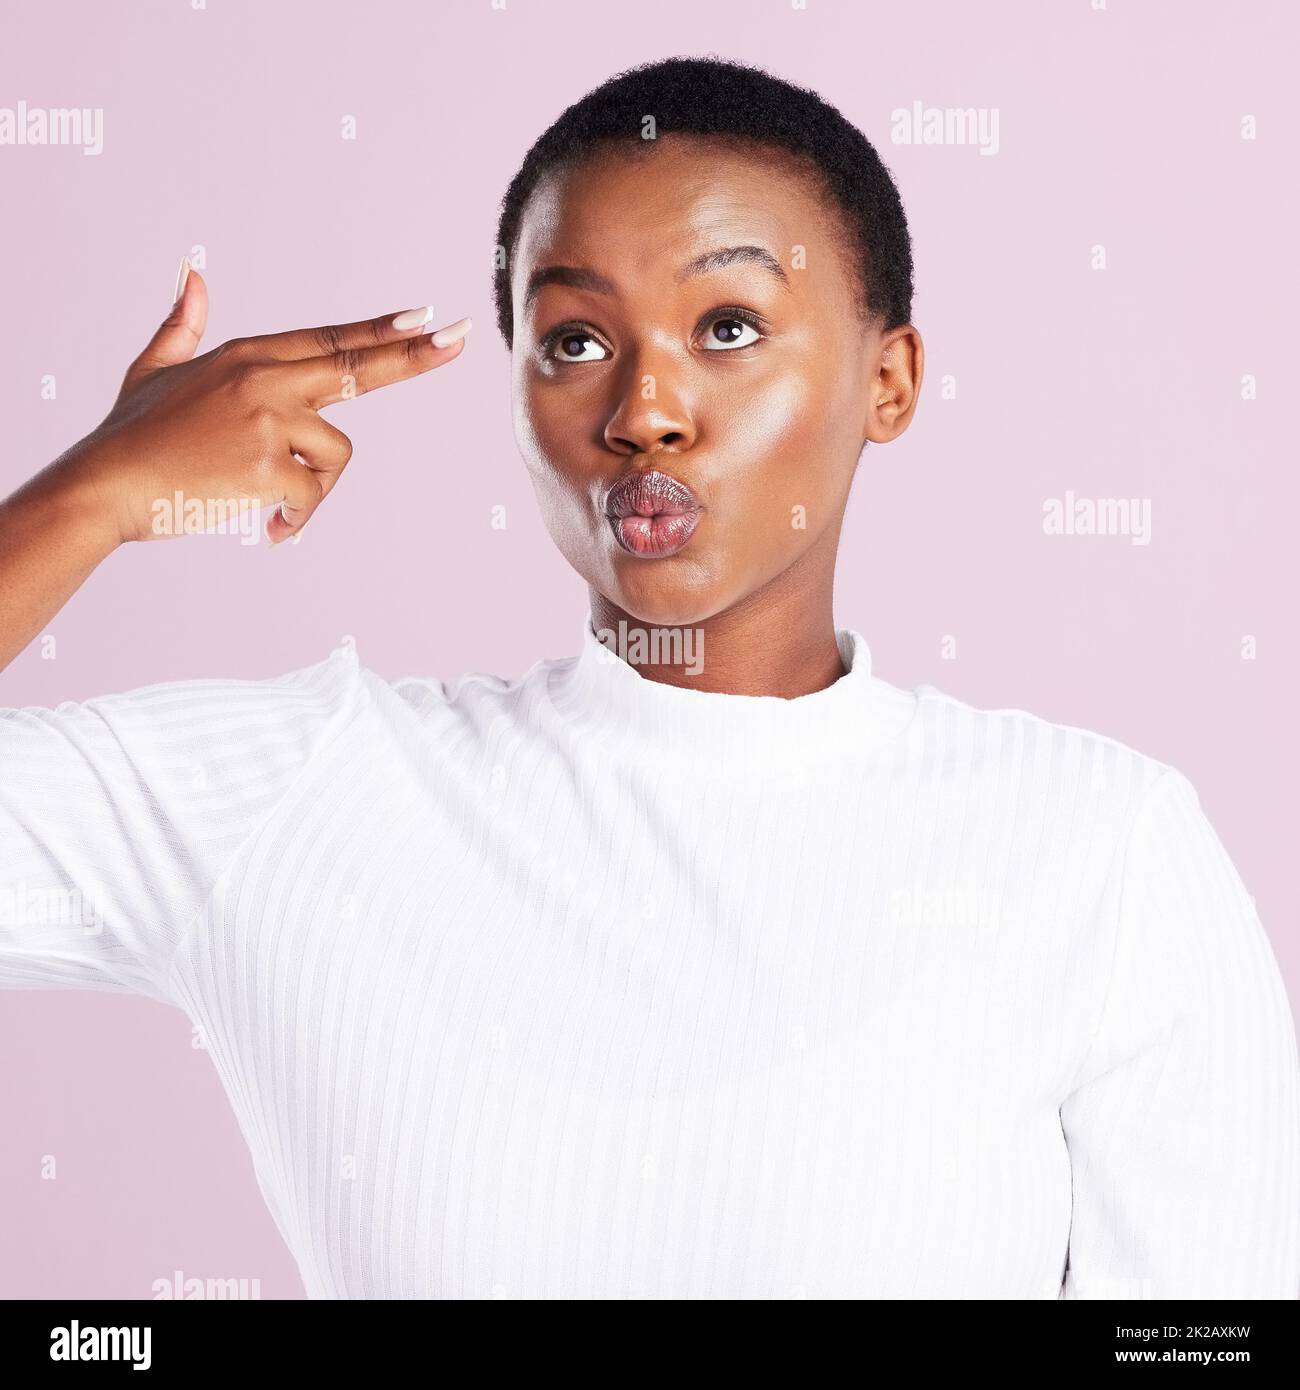 Lifes too short to not be weird. Studio shot of a young woman holding up a finger gun gesture against a pink background. Stock Photo